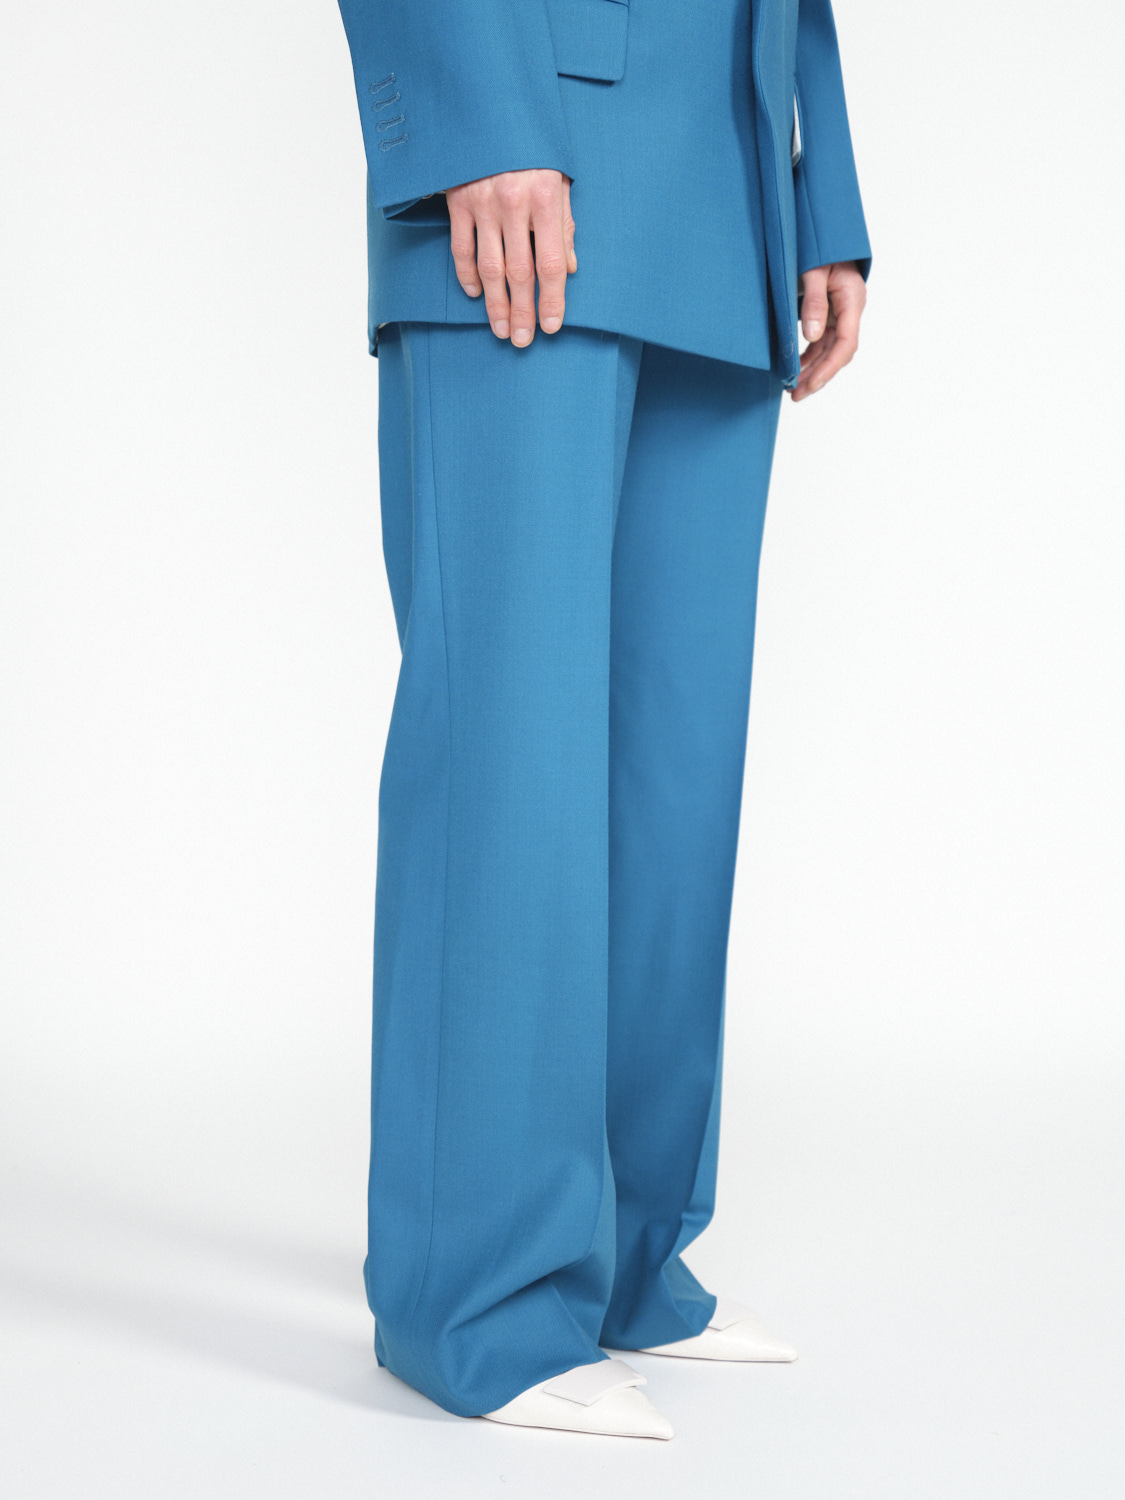 Victoria Beckham Pleated trousers with pockets  petrol 36